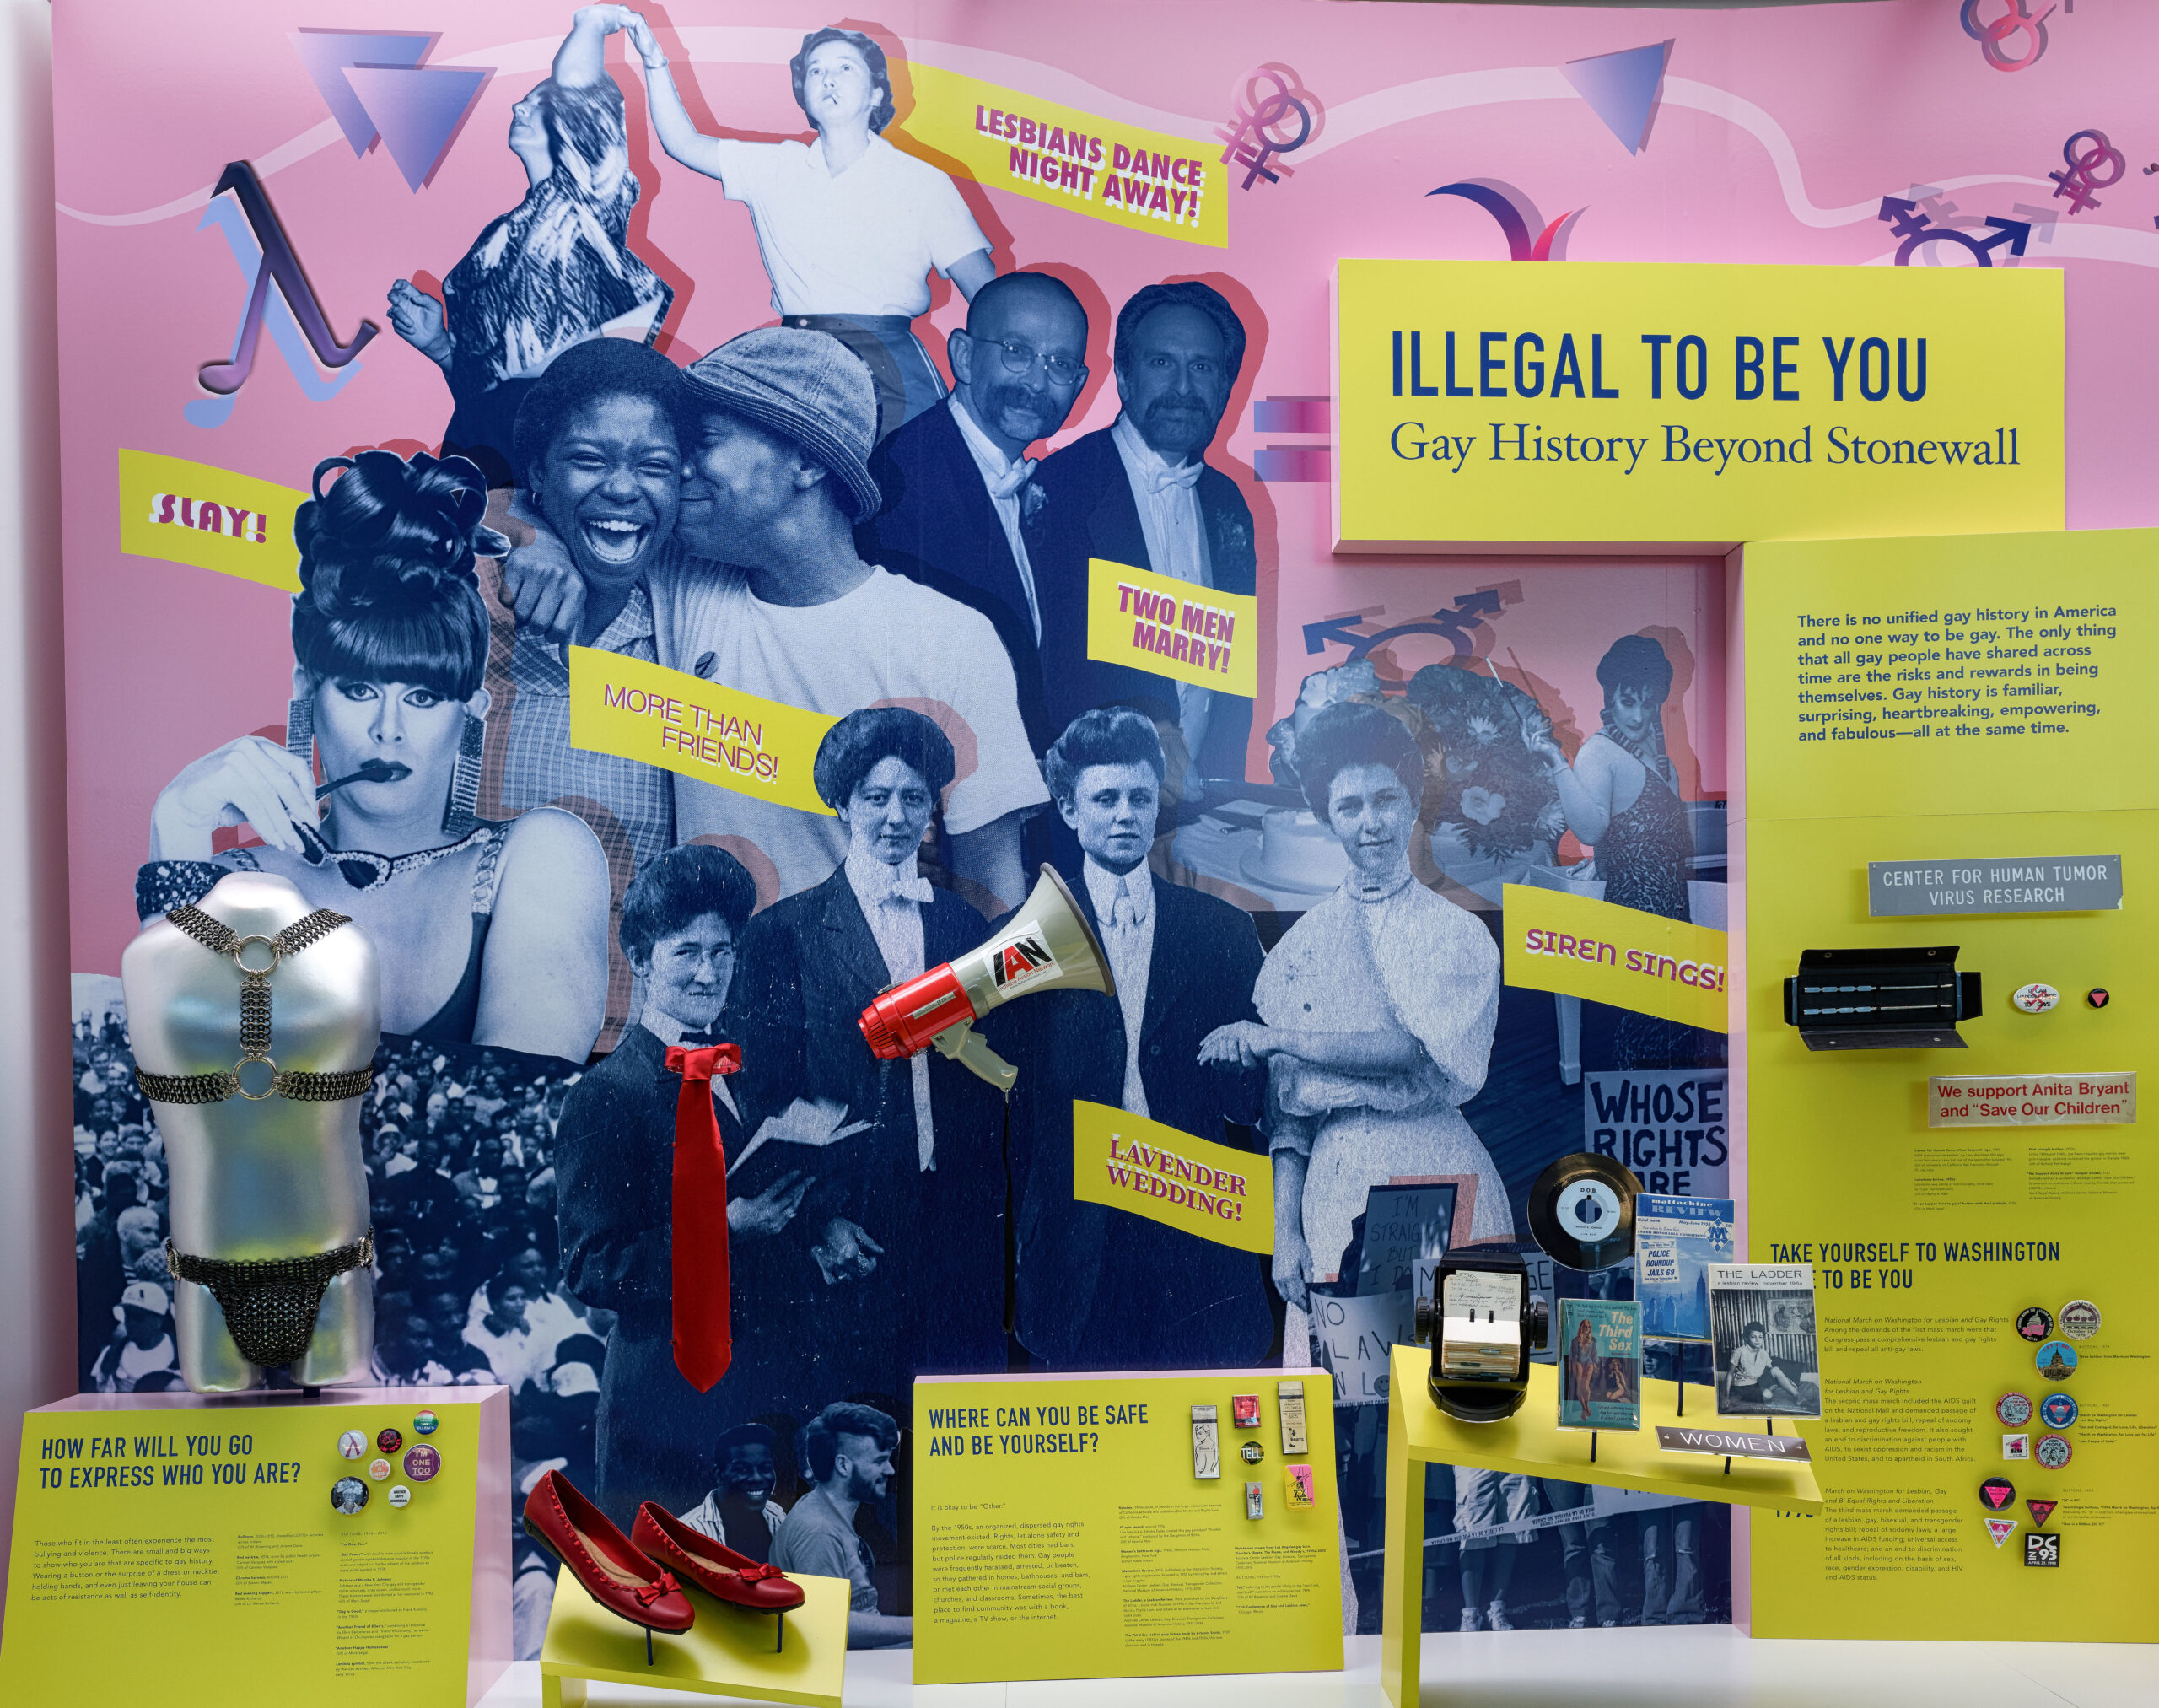 Illegal to Be You: Gay History Beyond Stonewall